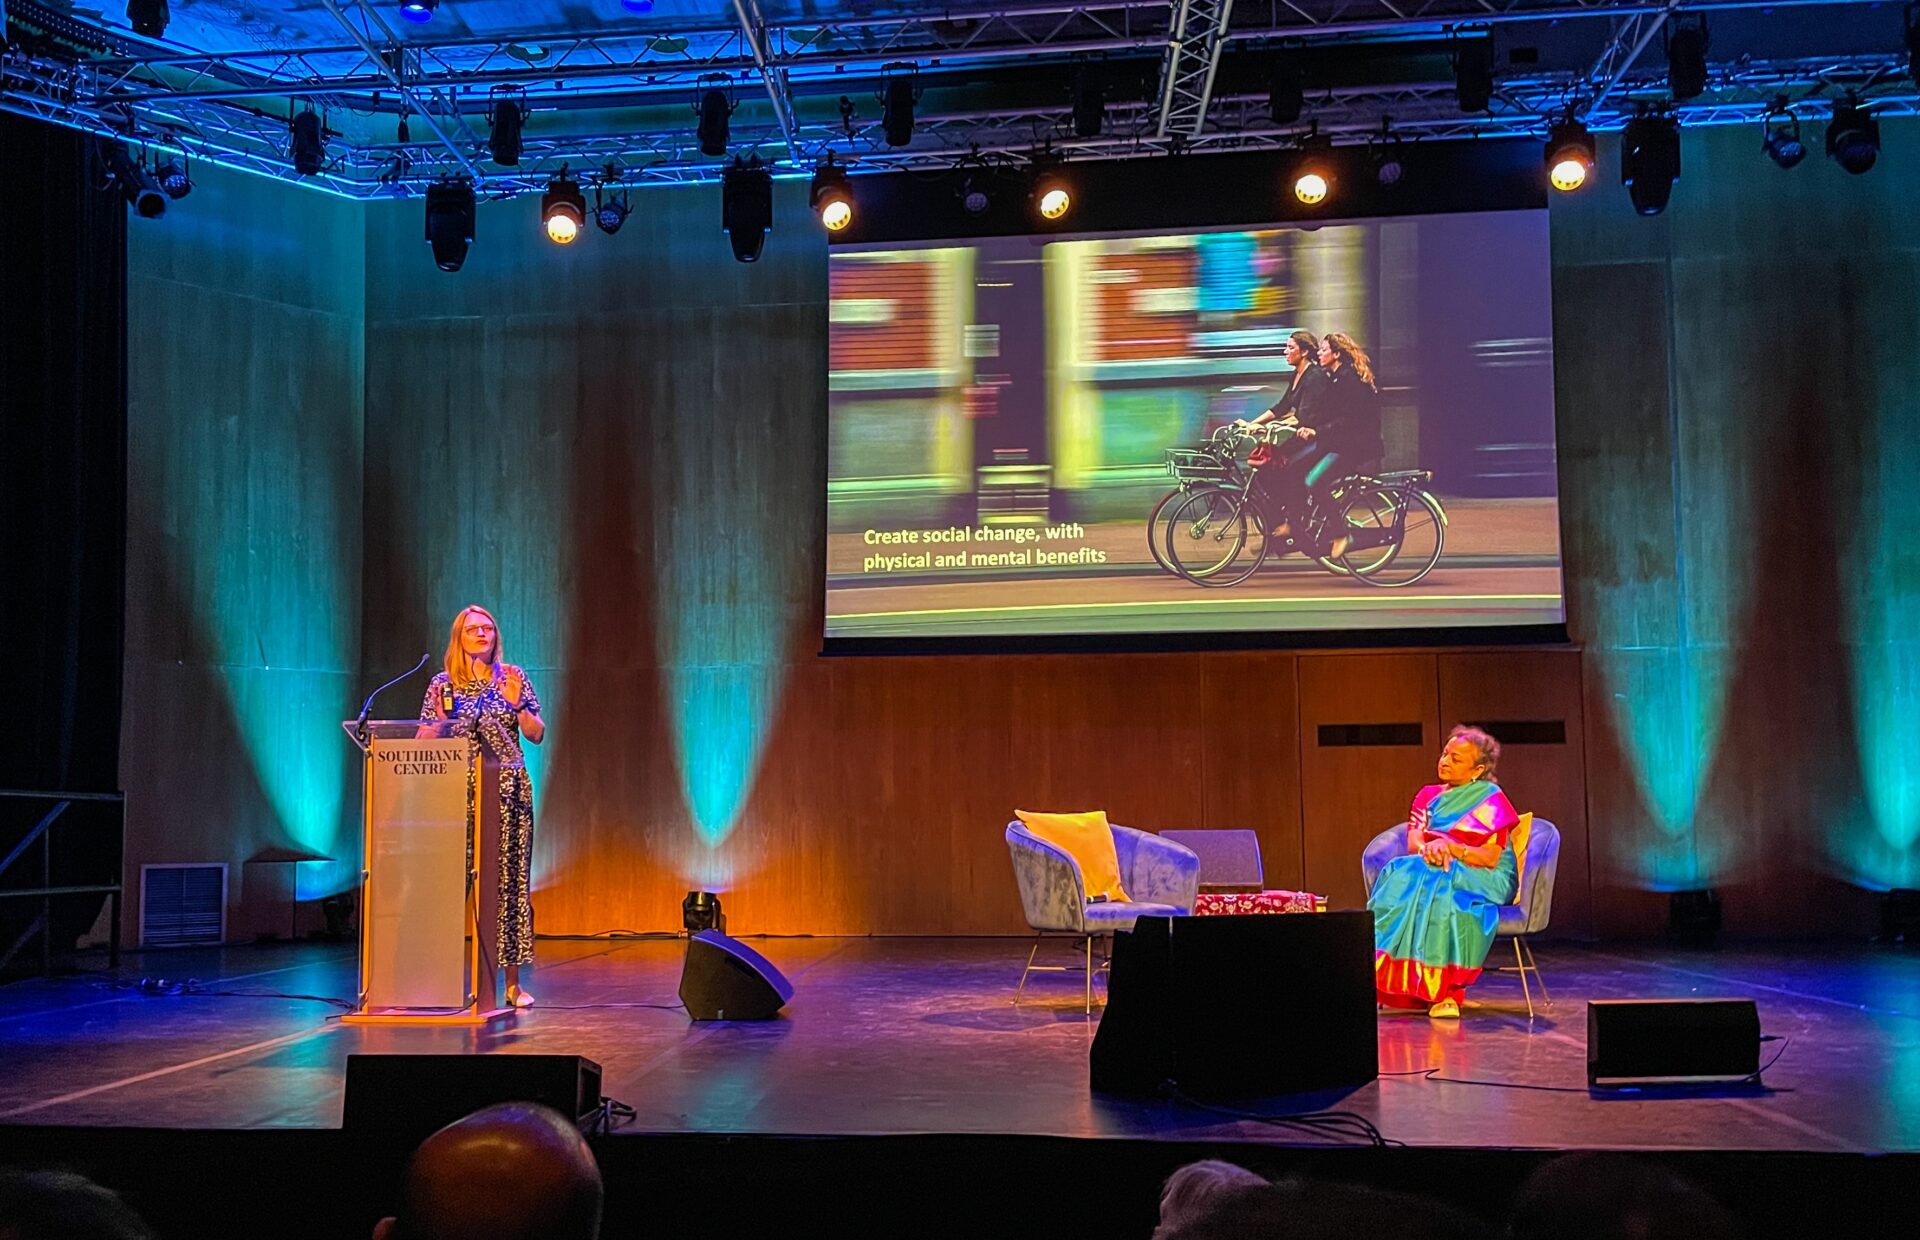 Two people on a stage, one at a lectern talking, the other sat on a chair. Presentation with image of people cycling in the backgroud.